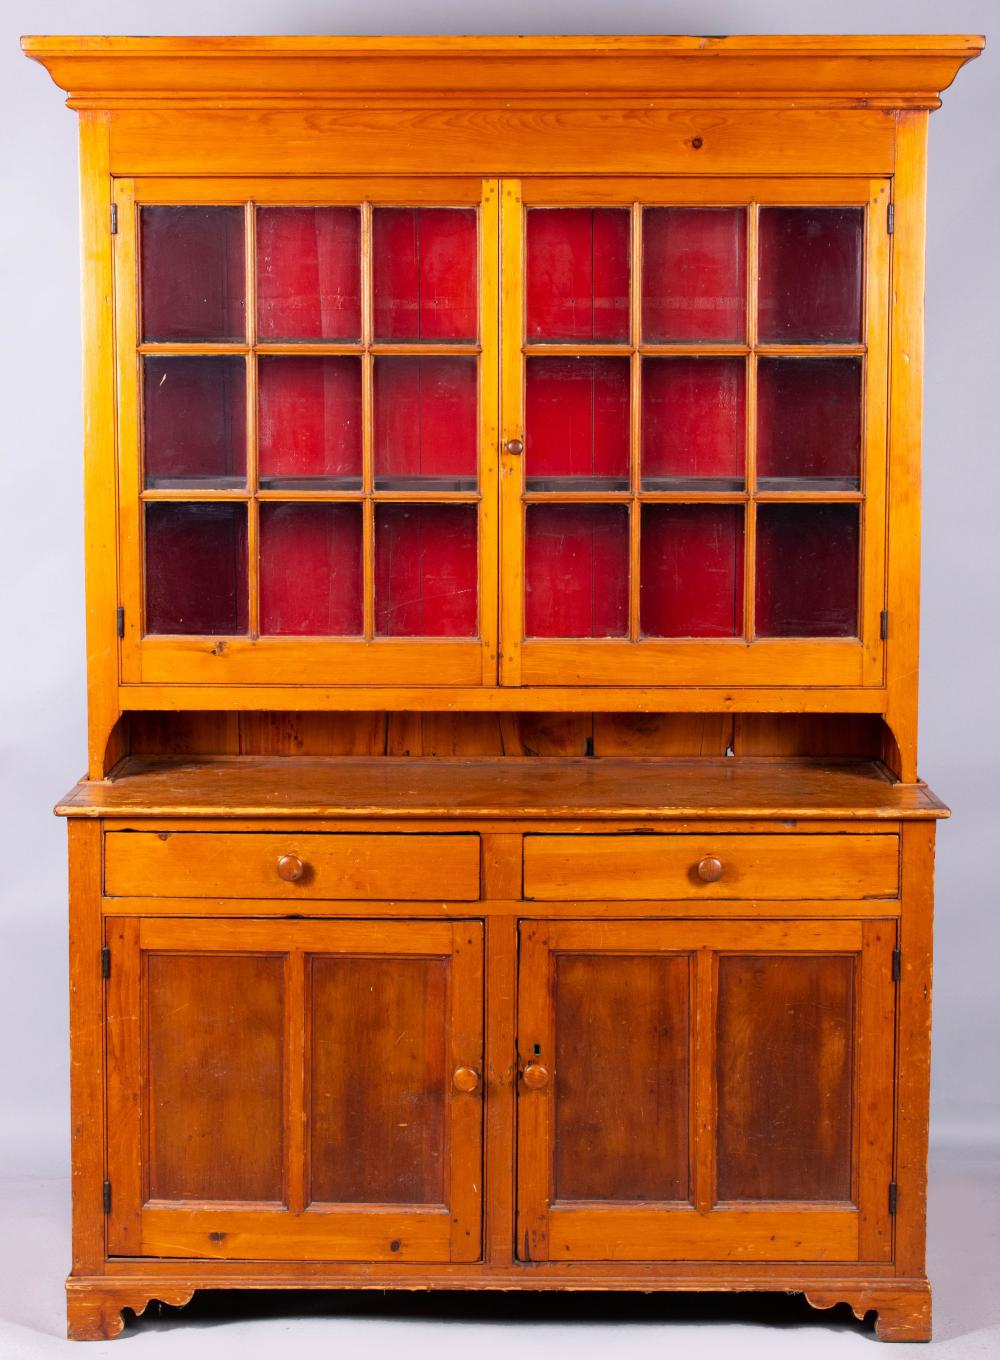 COUNTRY PINE CUPBOARD, 19TH CENTURY